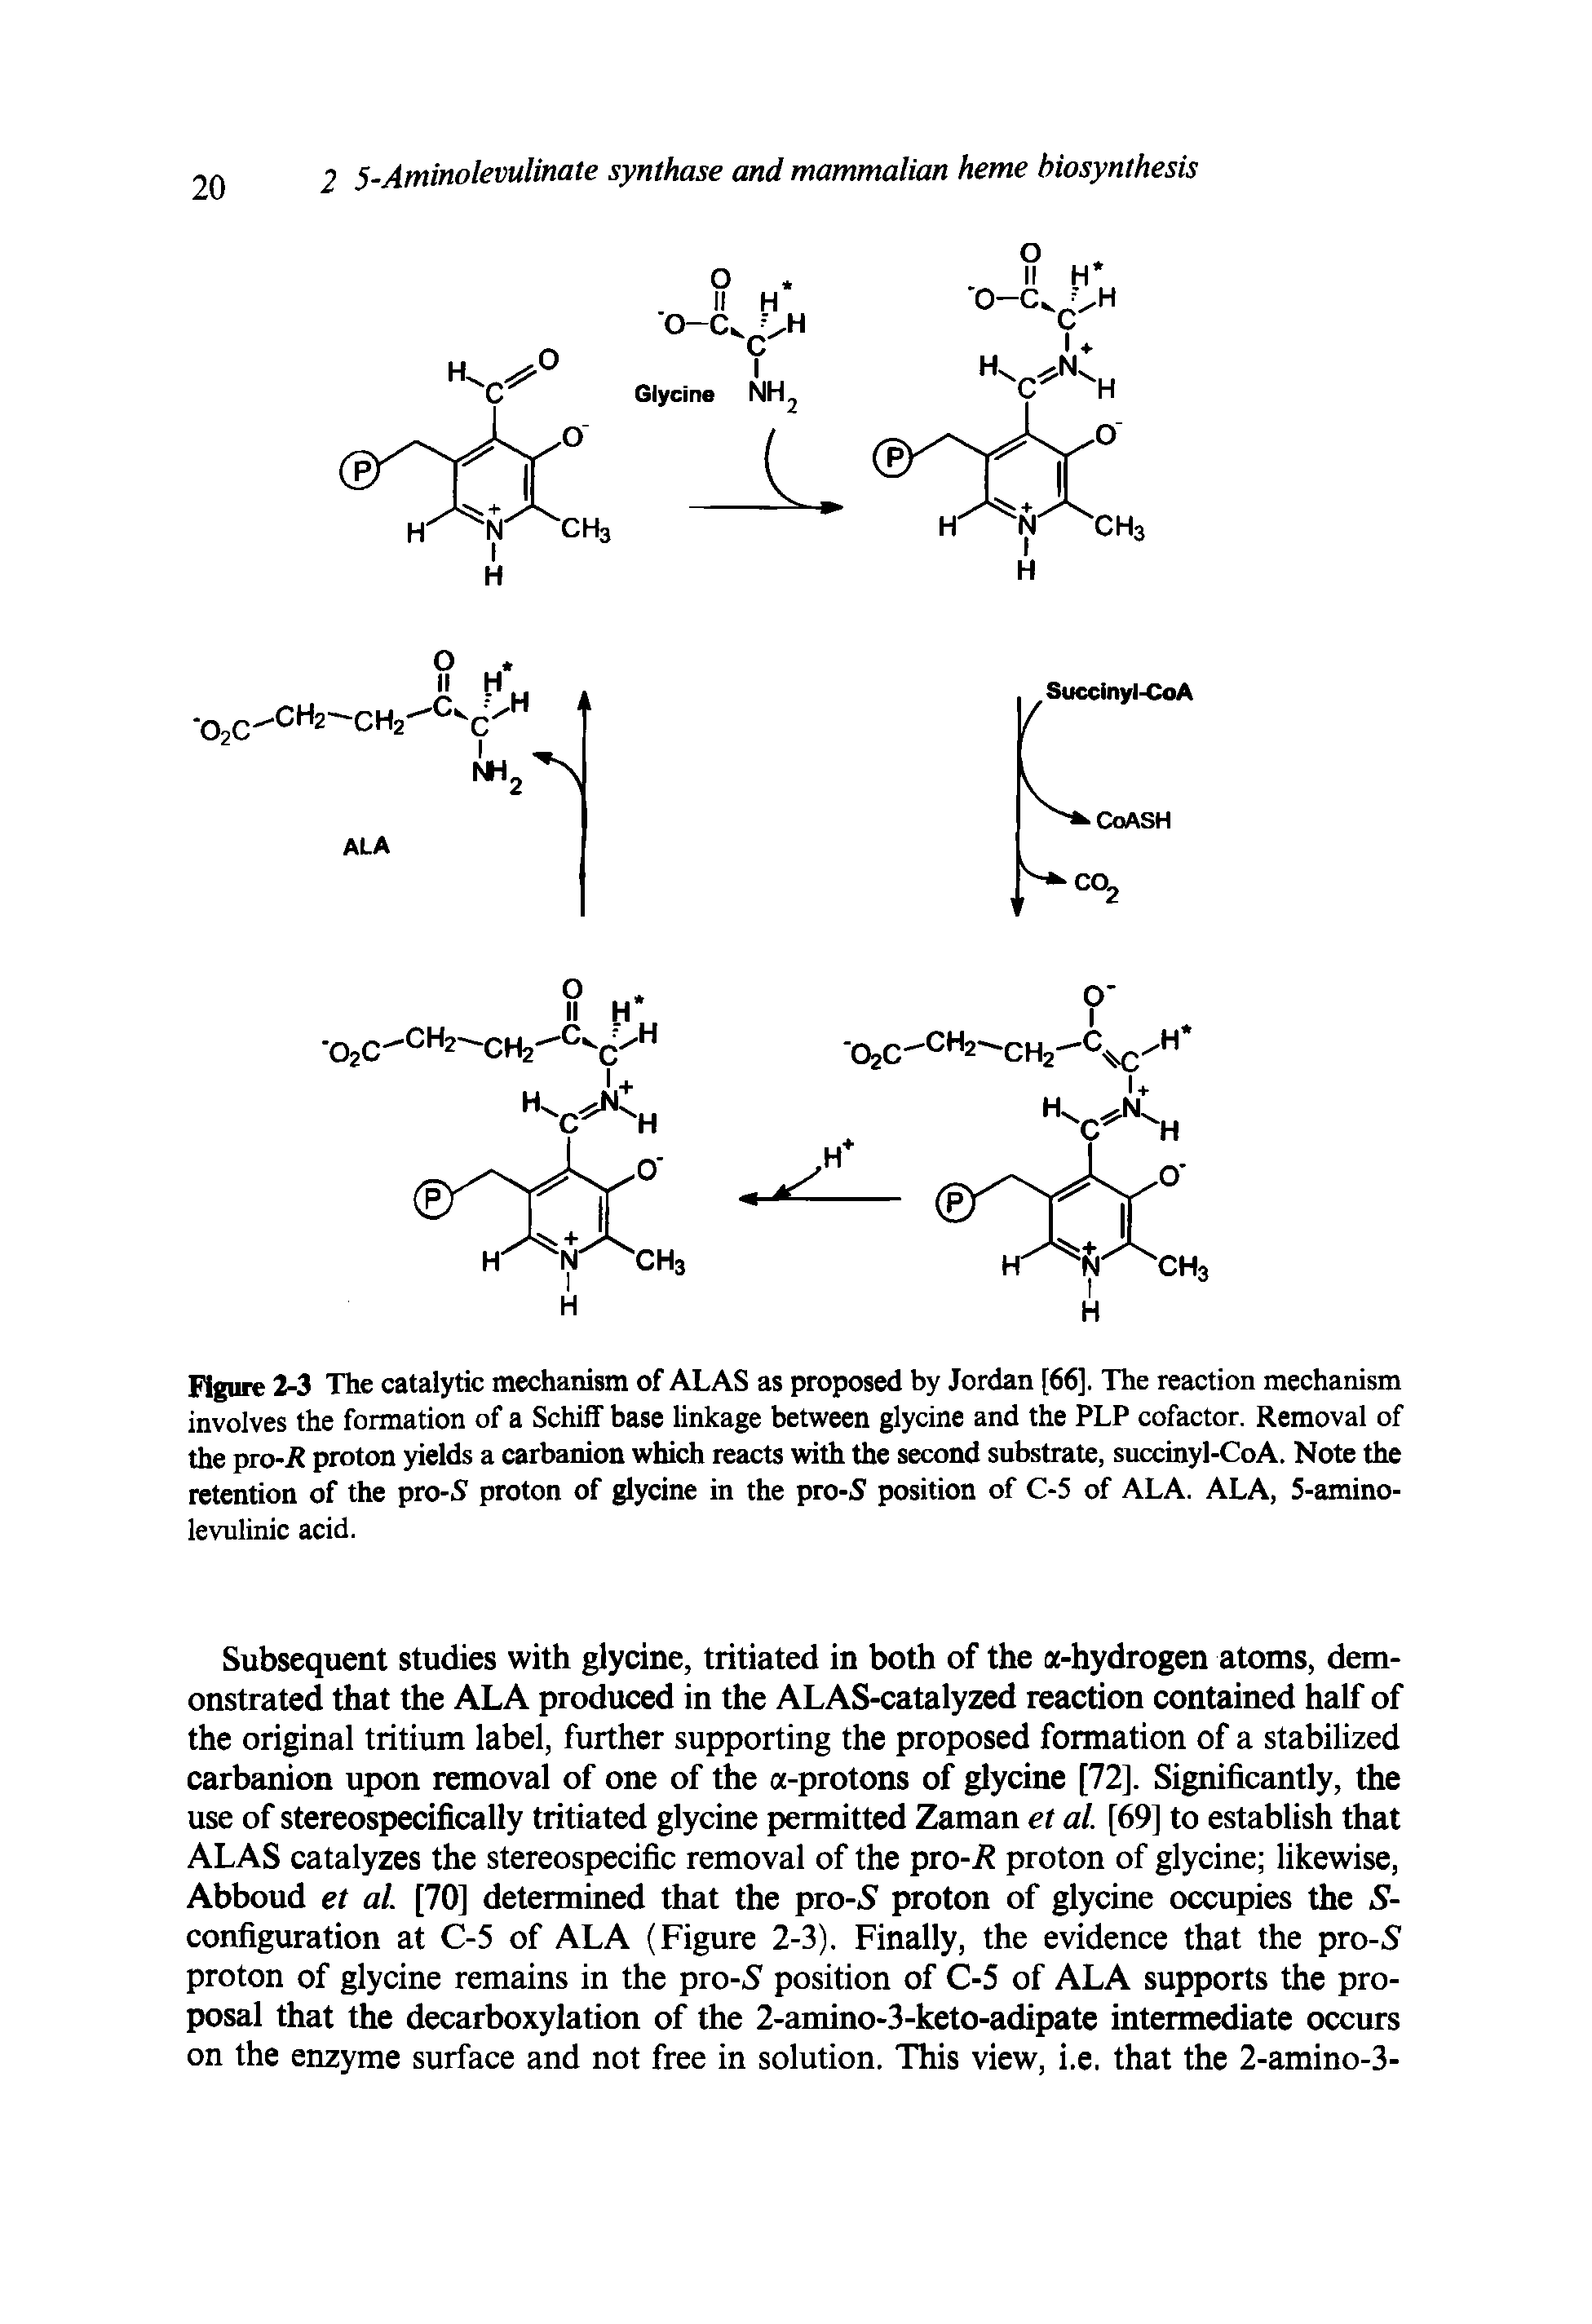 Figure 2-3 The catalytic mechanism of ALAS as proposed by Jordan [66], The reaction mechanism involves the formation of a Schiff base linkage between glycine and the PLP cofactor. Removal of the pio-R proton yields a carbanion which reacts with the second substrate, succinyl-CoA. Note the retention of the pro-5 proton of glycine in the pro-5 position of C-5 of ALA. ALA, 5-amino-levulinic acid.